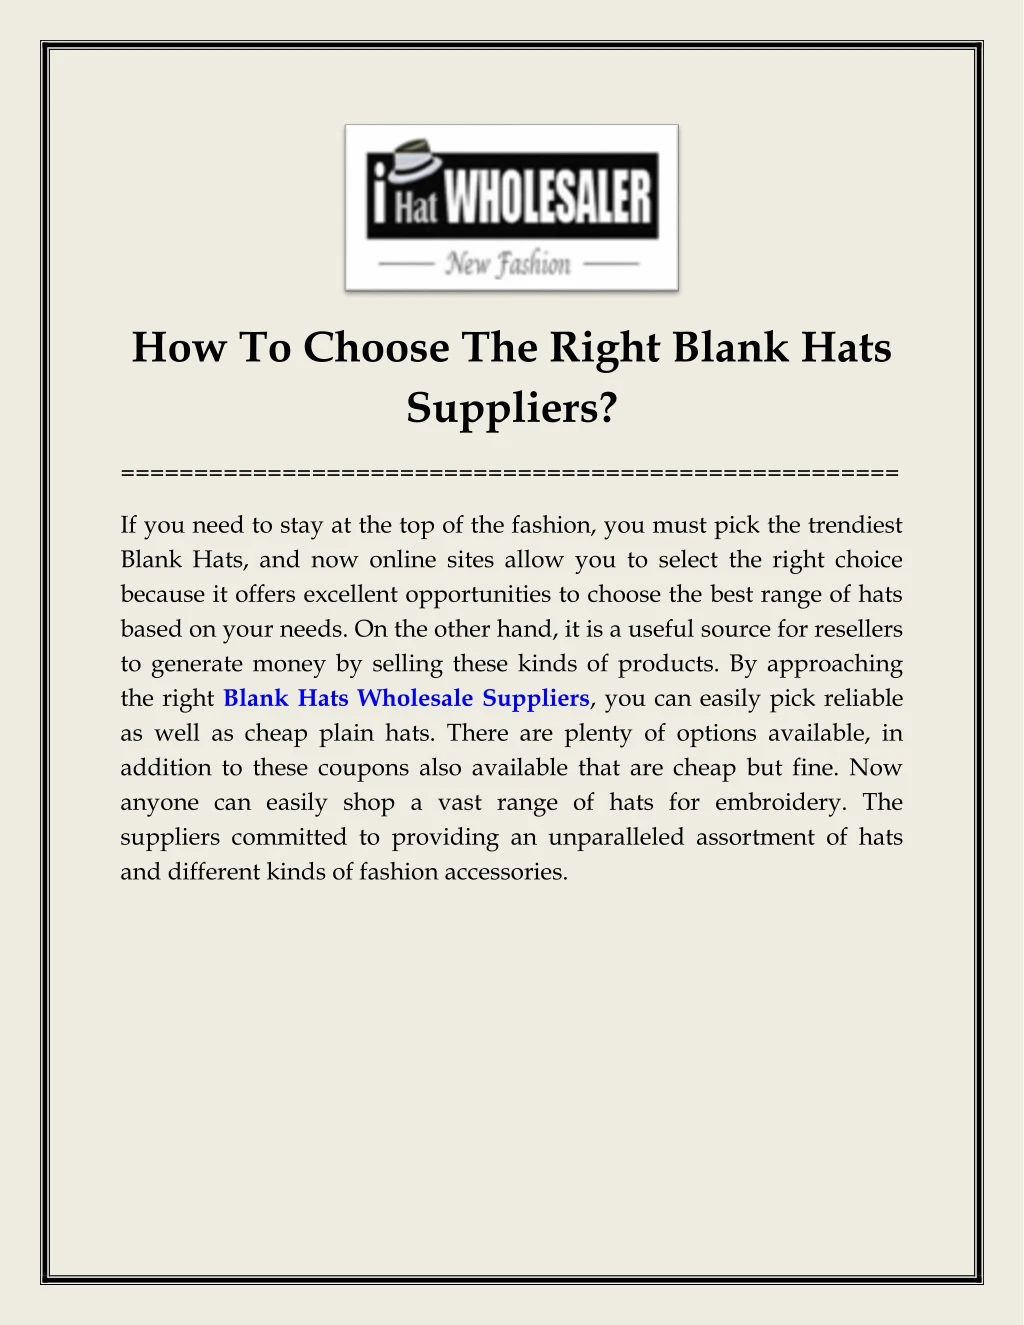 how to choose the right blank hats suppliers